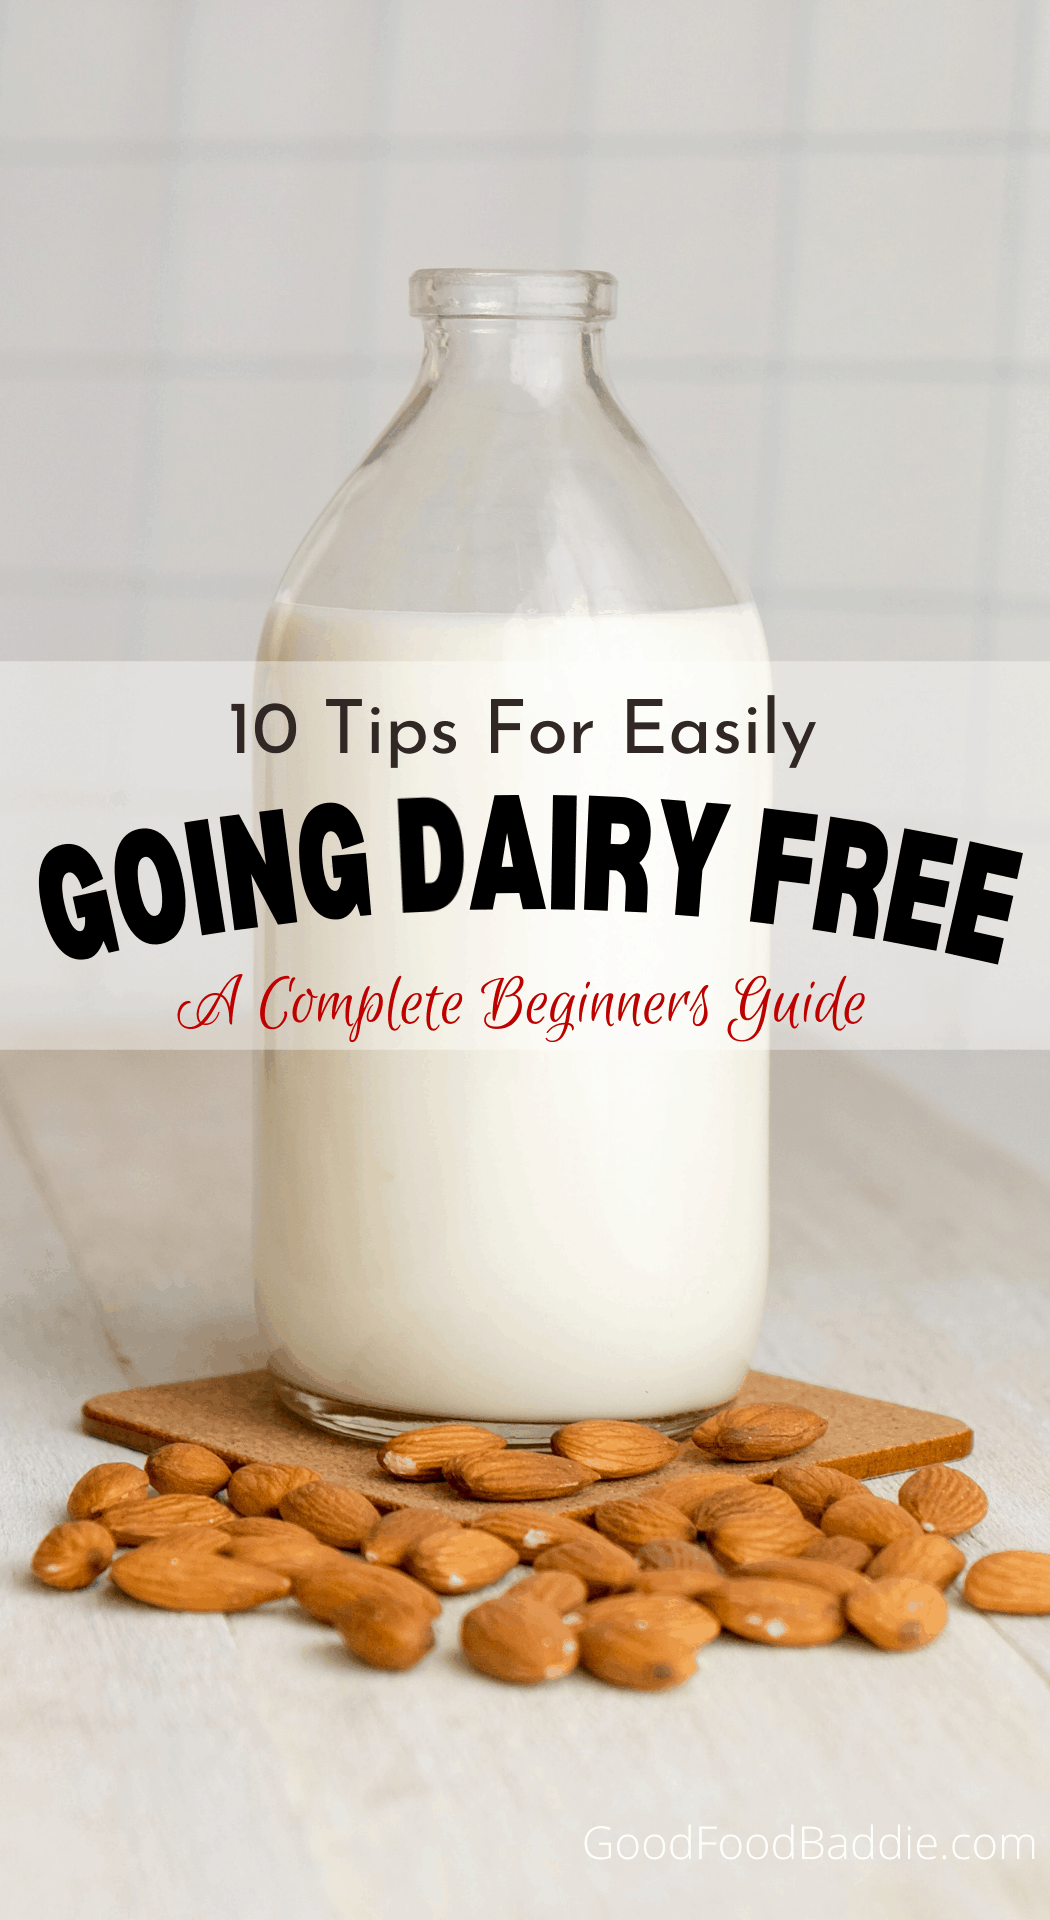 10 Tips For Easily Going Dairy-Free